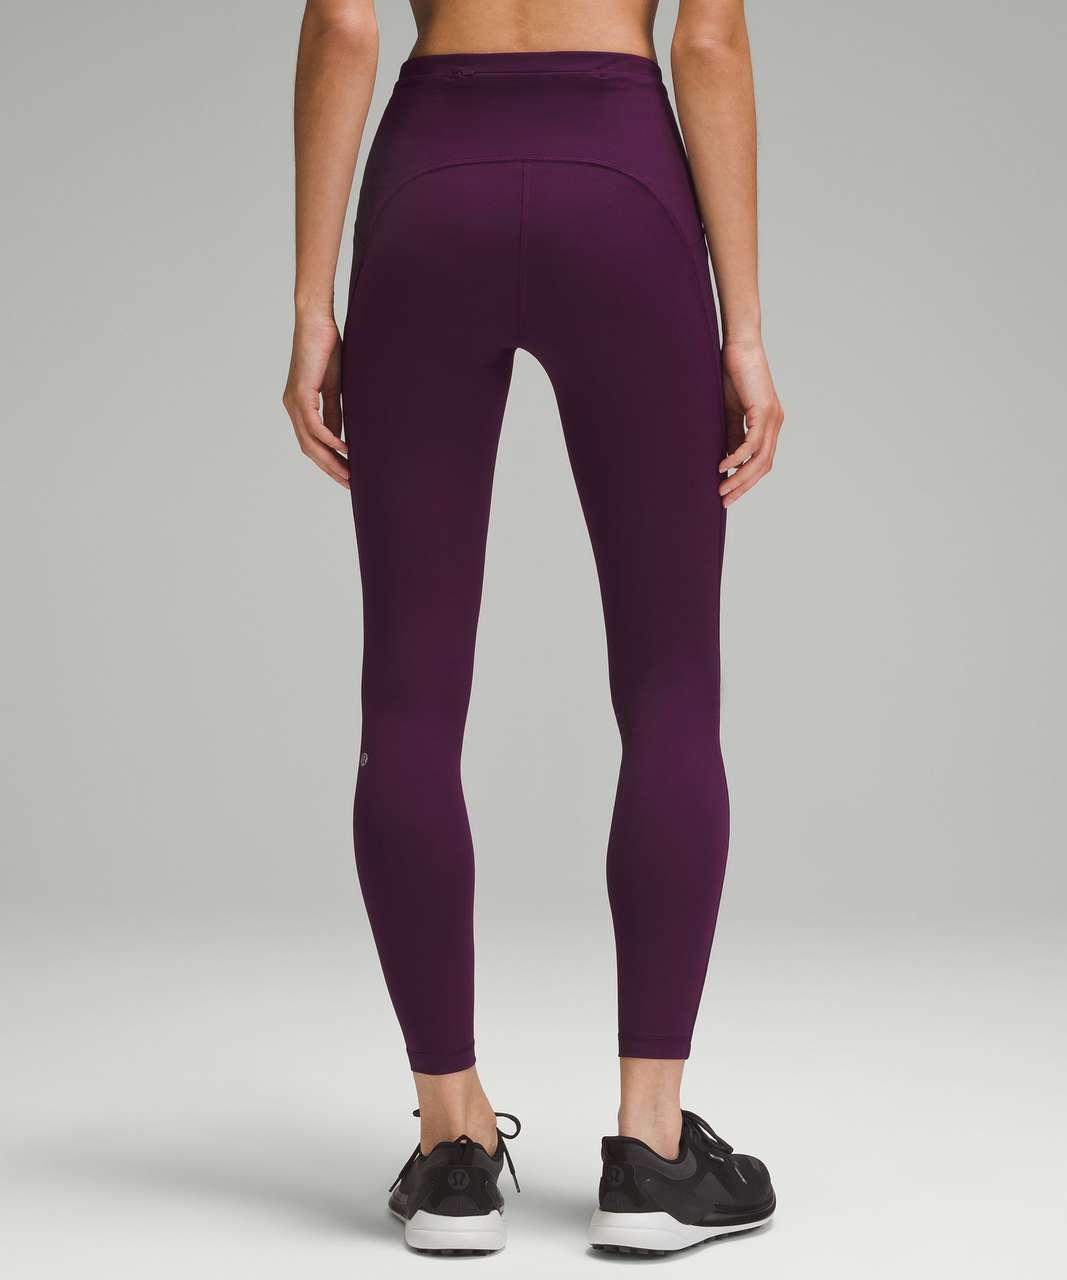 Swift Speed High-Rise Tight 28 *Brushed Luxtreme